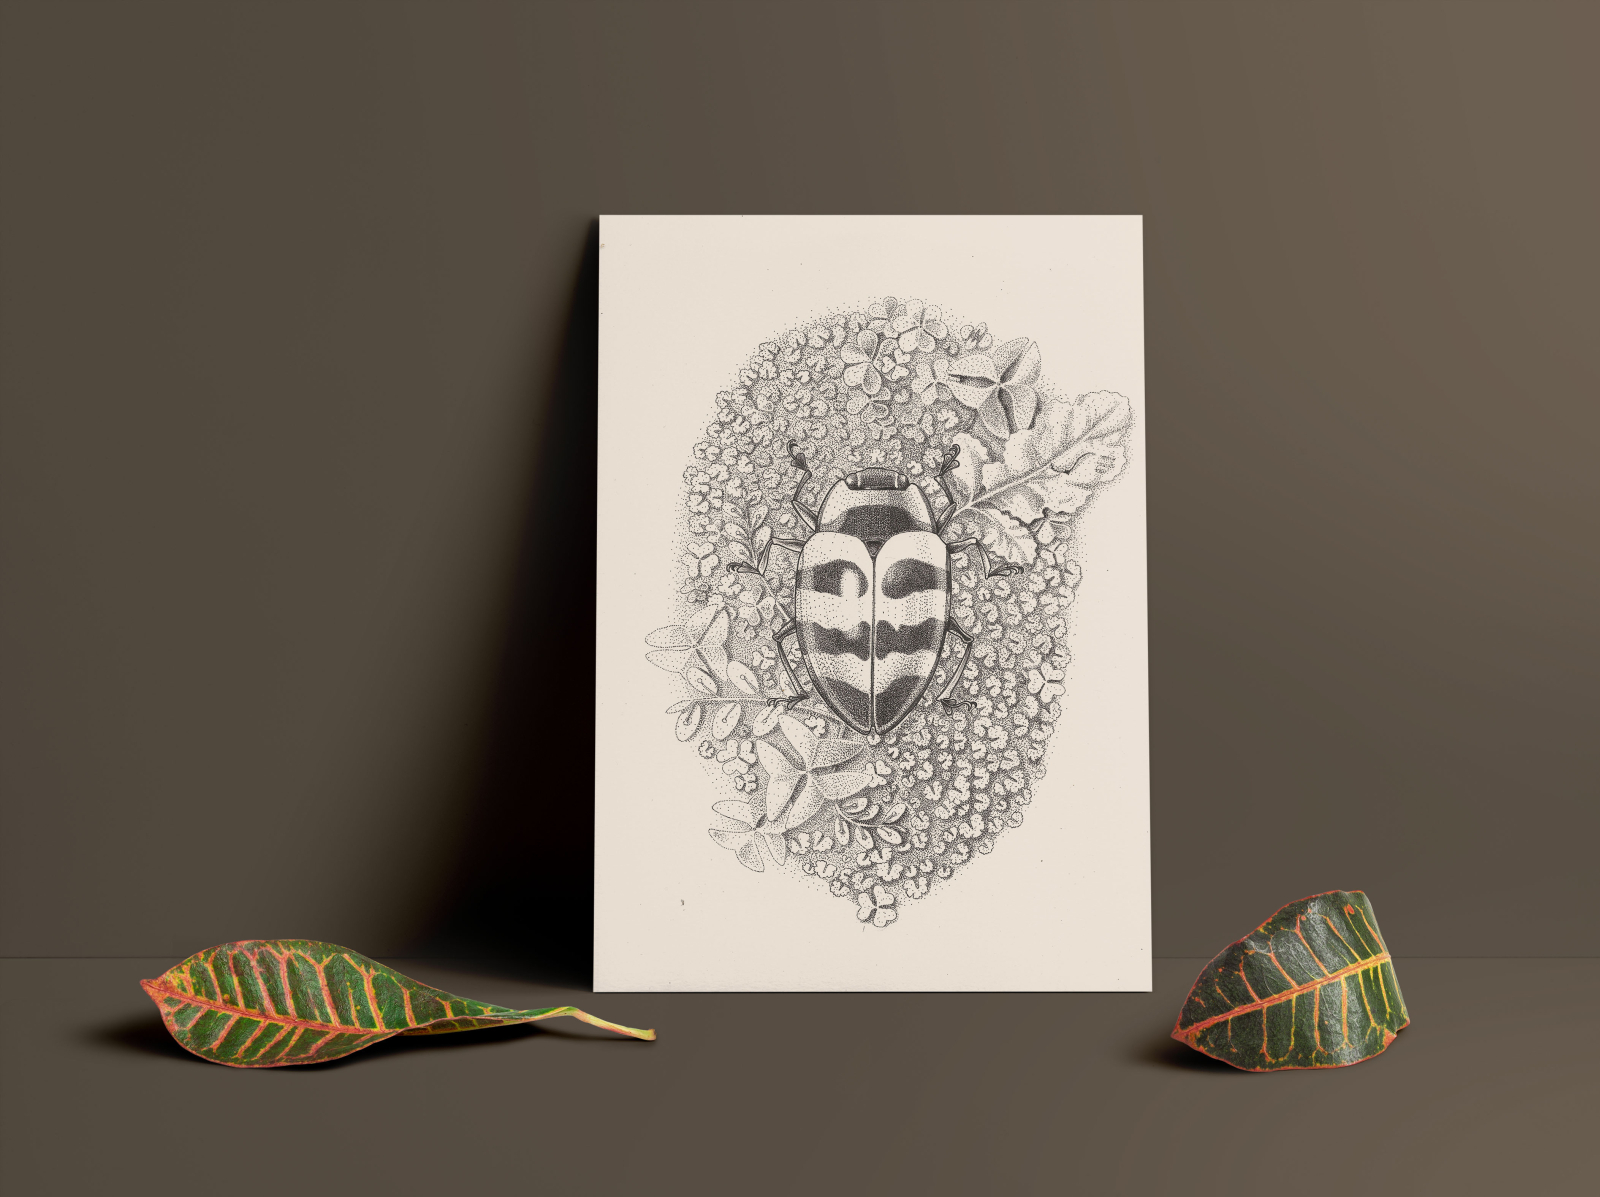 Stippling insects series by Alejo Mosquera on Dribbble